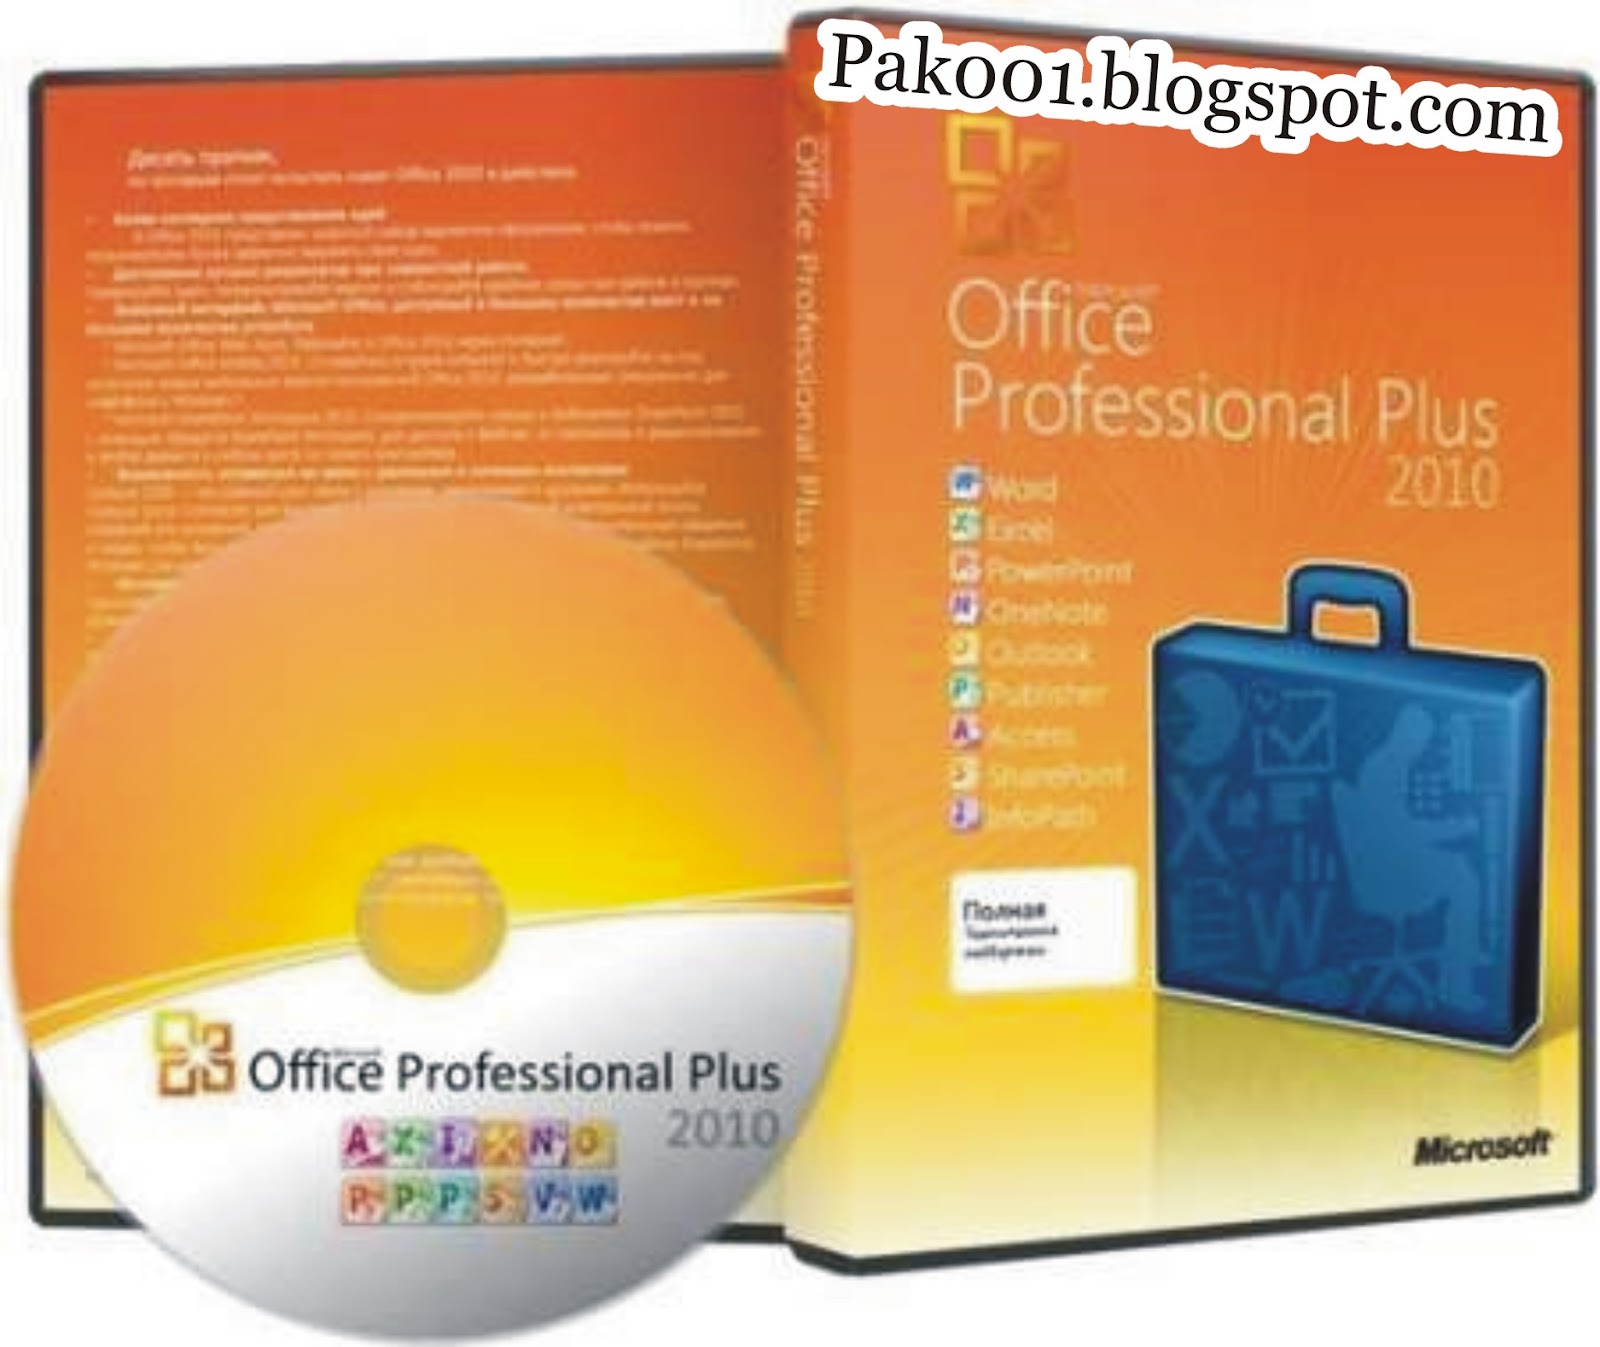 Free Games And Softwares Microsoft Office Professional Plus 2010